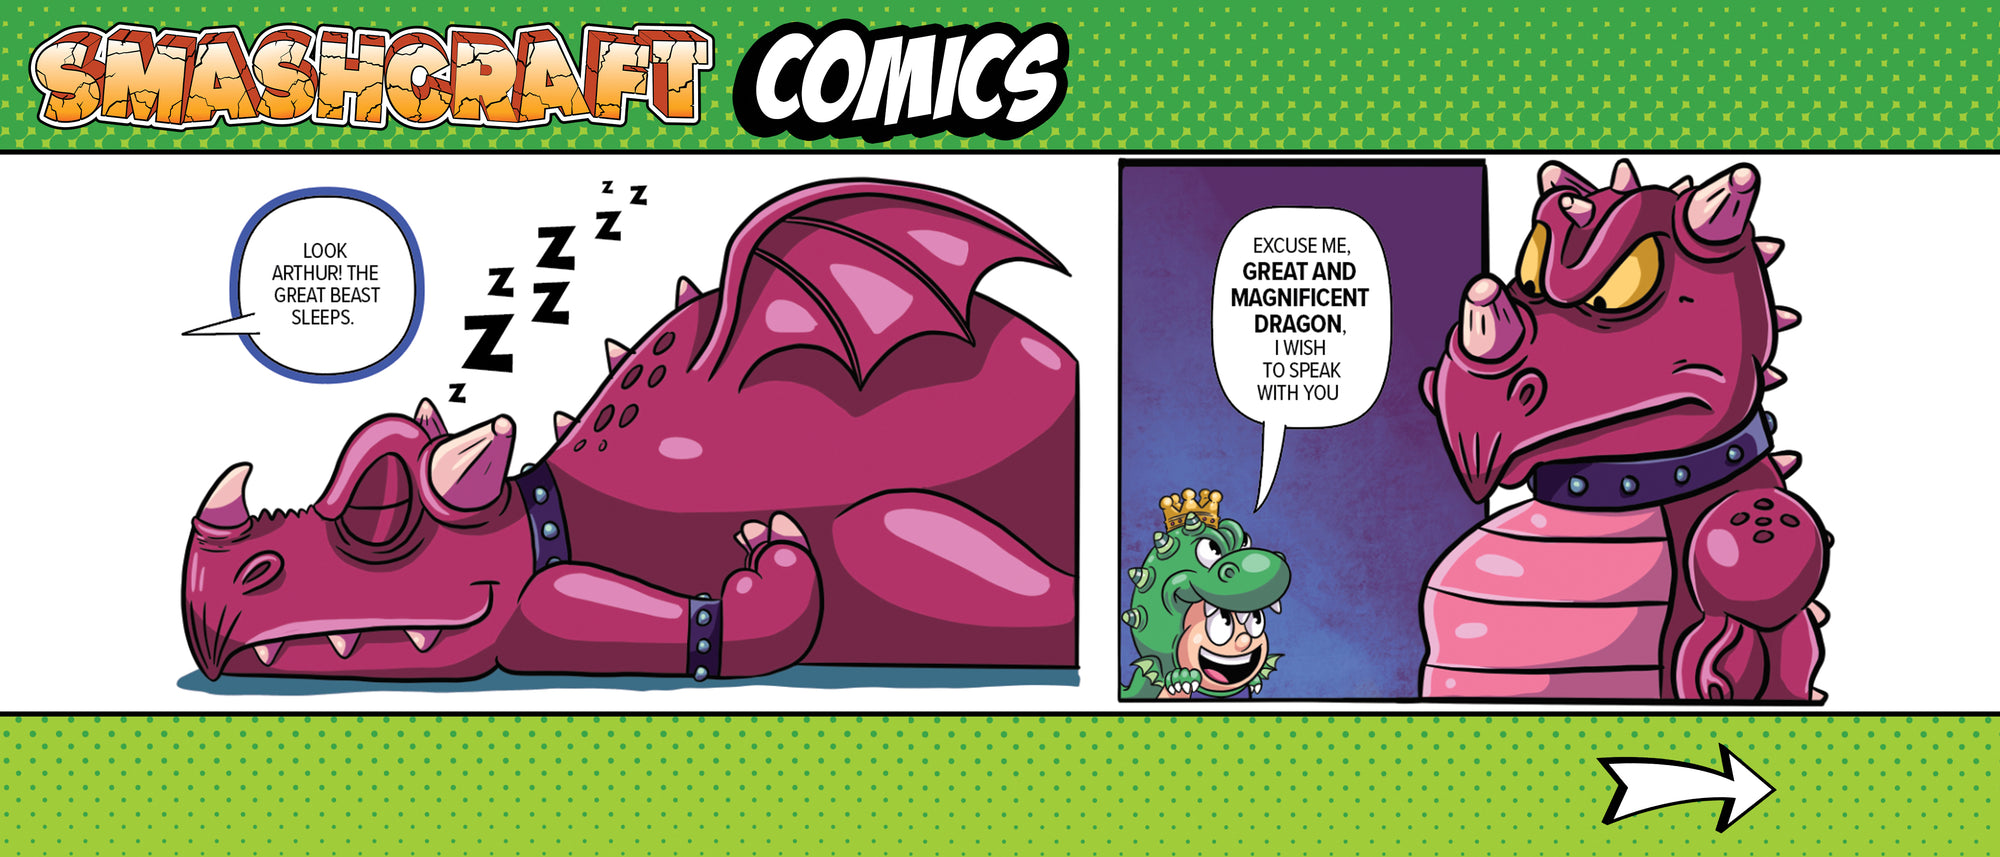 Comic strip showing a magenta dragon sleeping and King arthur approaching the dragon for a conversation.